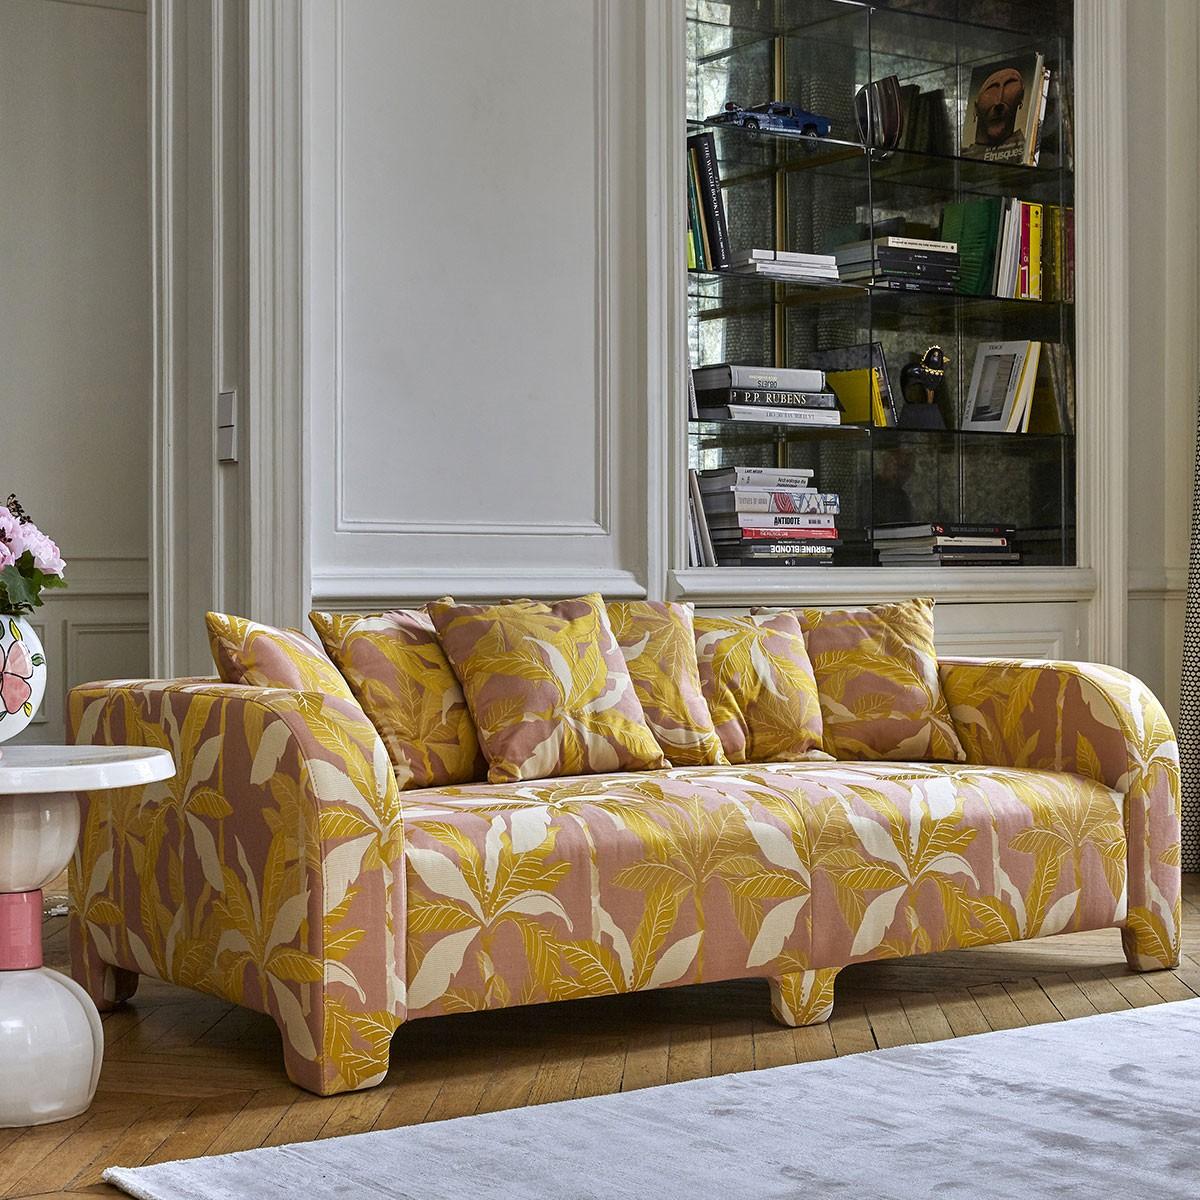 Popus Editions Graziella 3 seater sofa in citrine marrakech jacquard fabric

A foot that hides another. A cushion that hides another. A curve that hides another with contemporary lines and a base like a punctuation mark, this sofa gives pride of